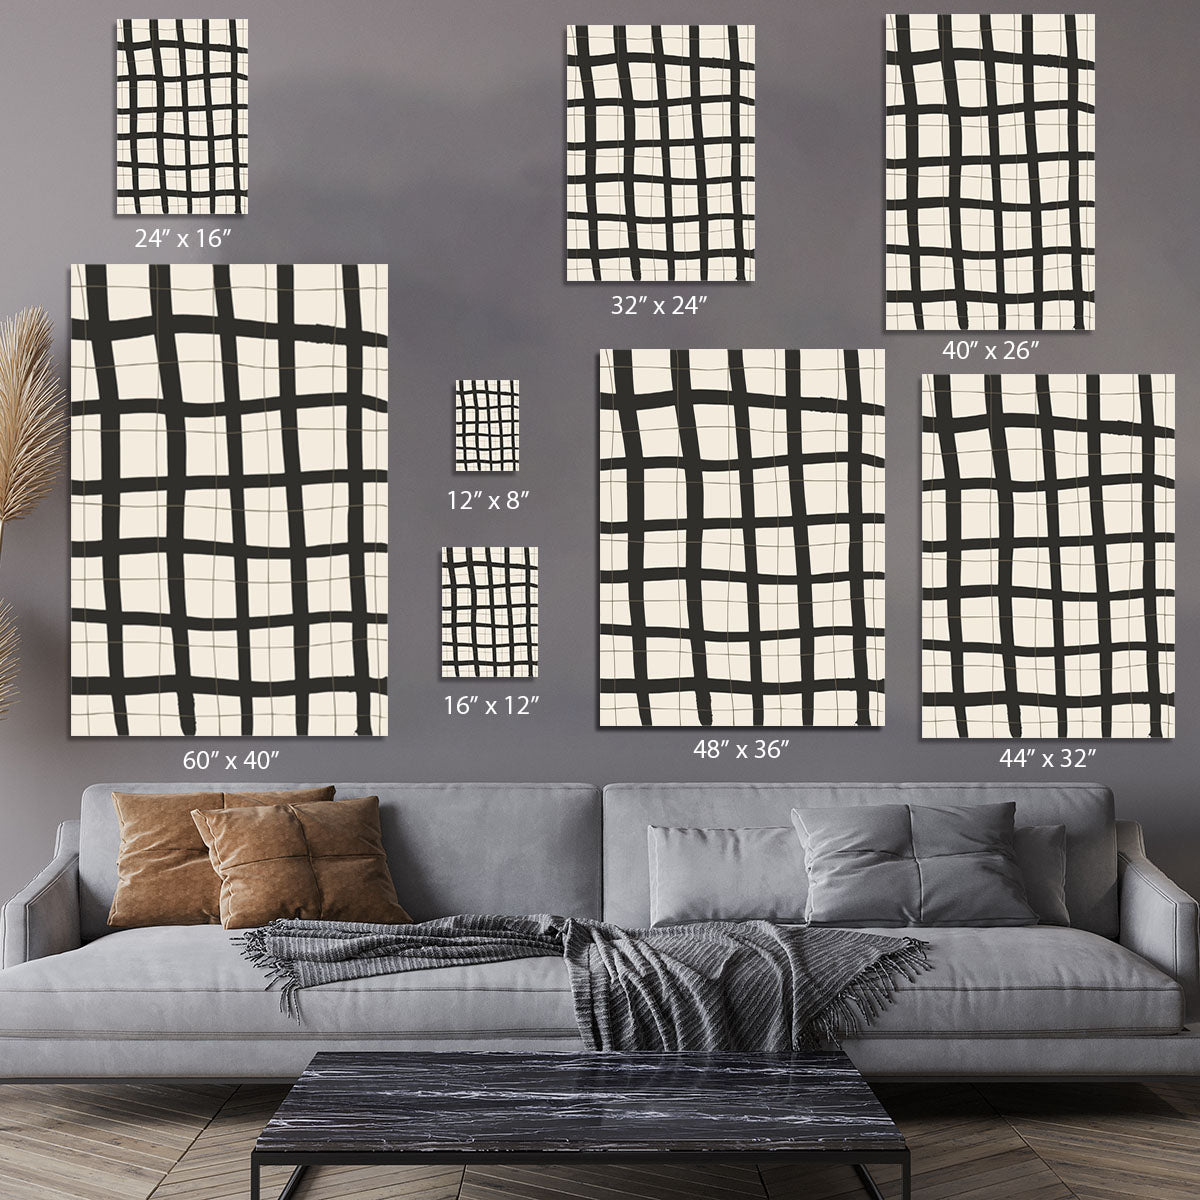 Black Grid Canvas Print or Poster - 1x - 7